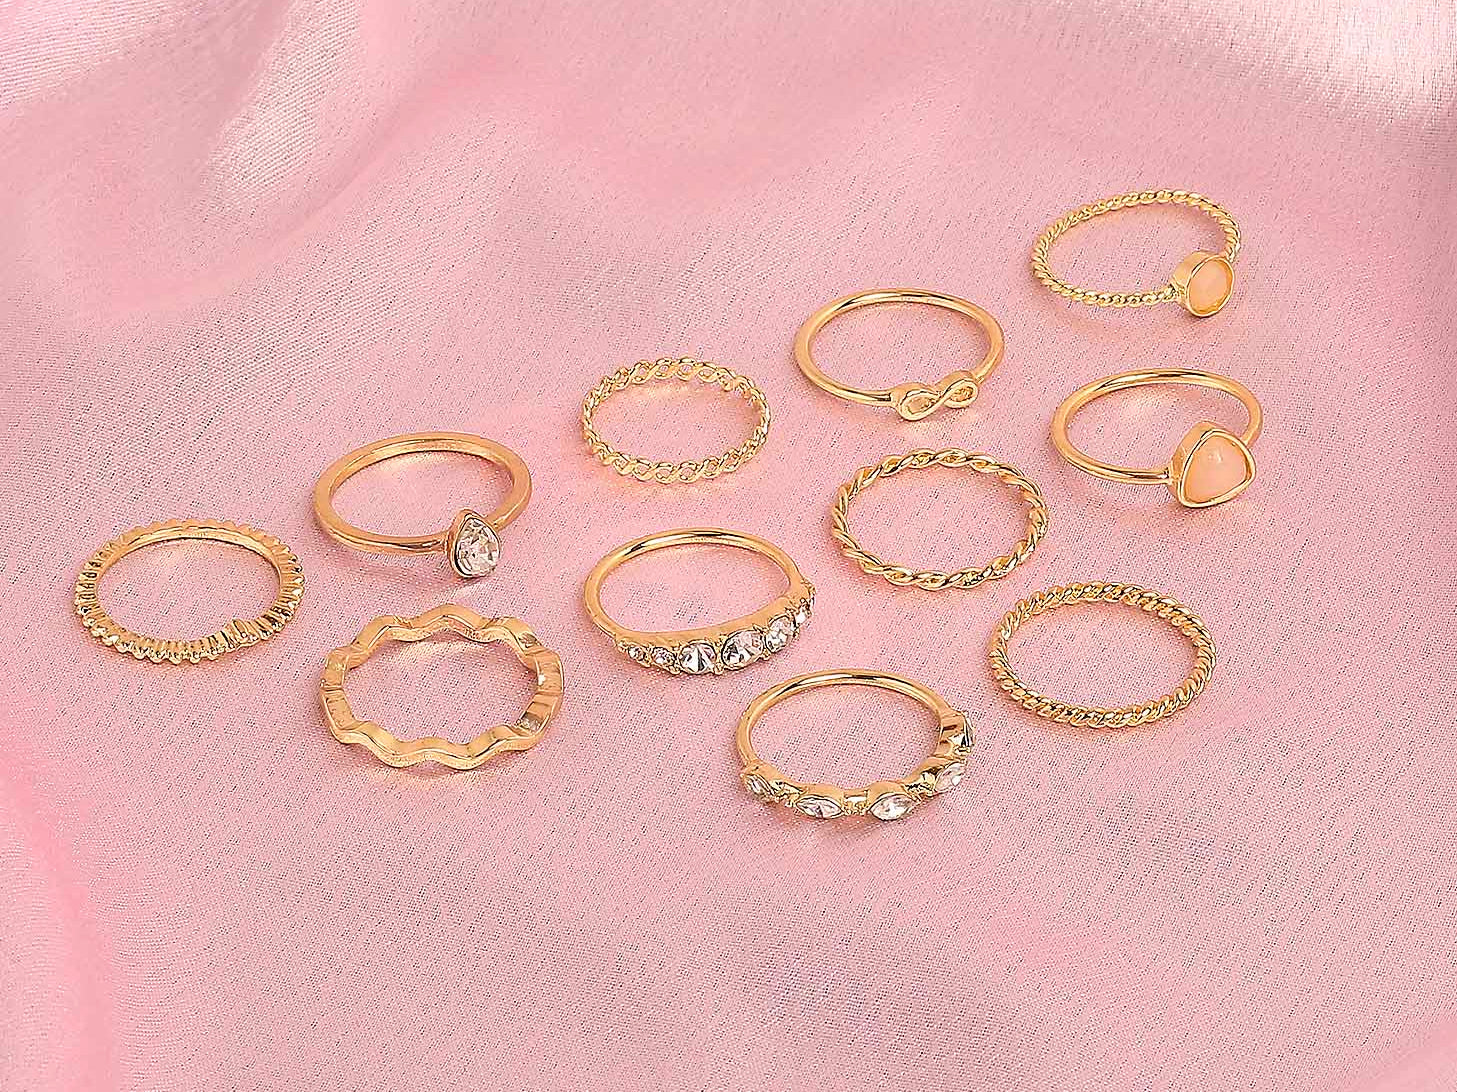 Accessorize London Pack Of 12 Stackings Rings Set